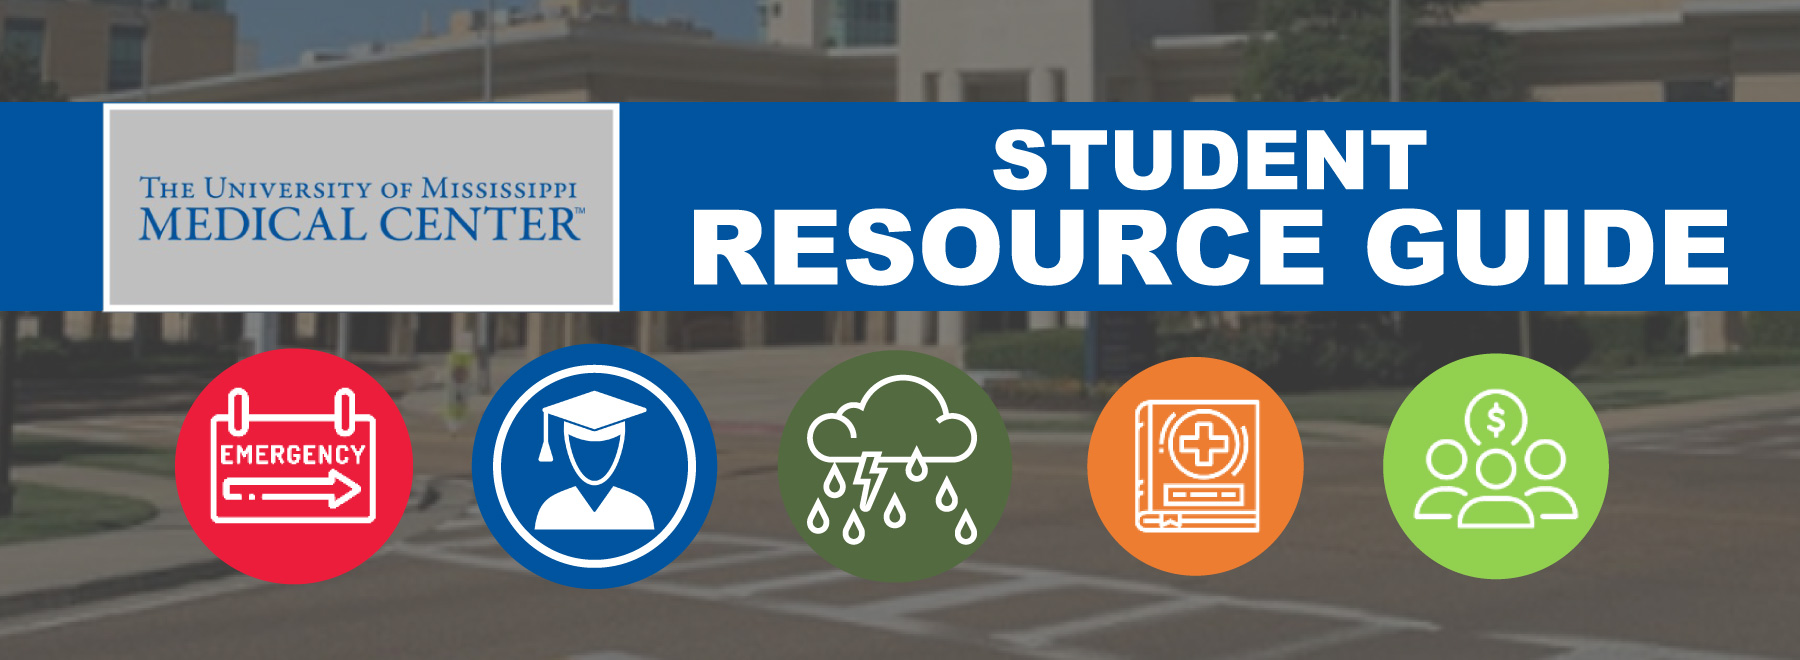 University of Mississippi Medical Center Student Services Resource Guide